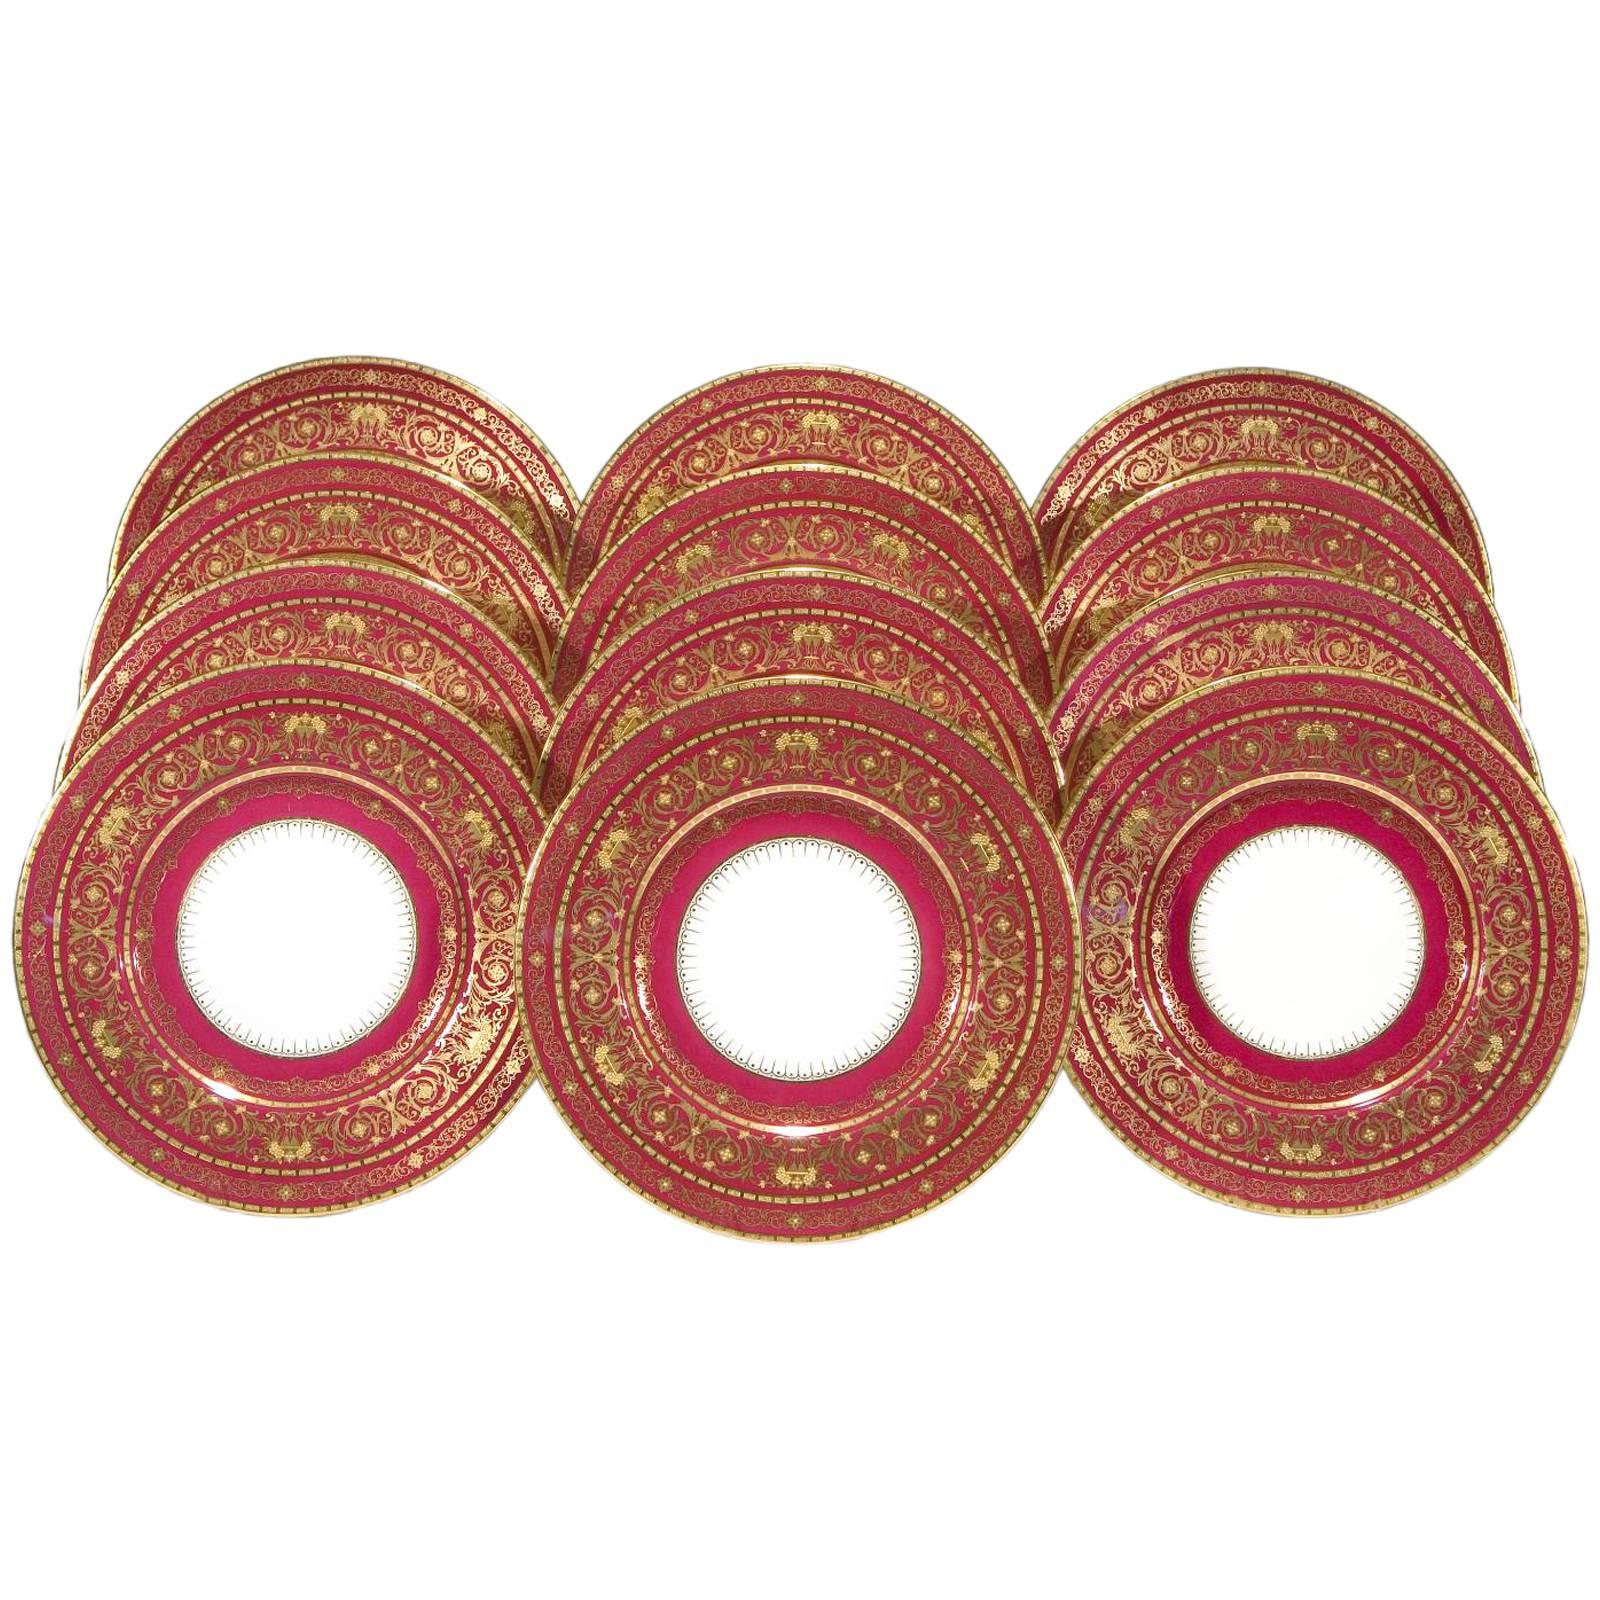 12 Minton Burgundy Red Border Service Plates with Raised Paste Gold Decoration